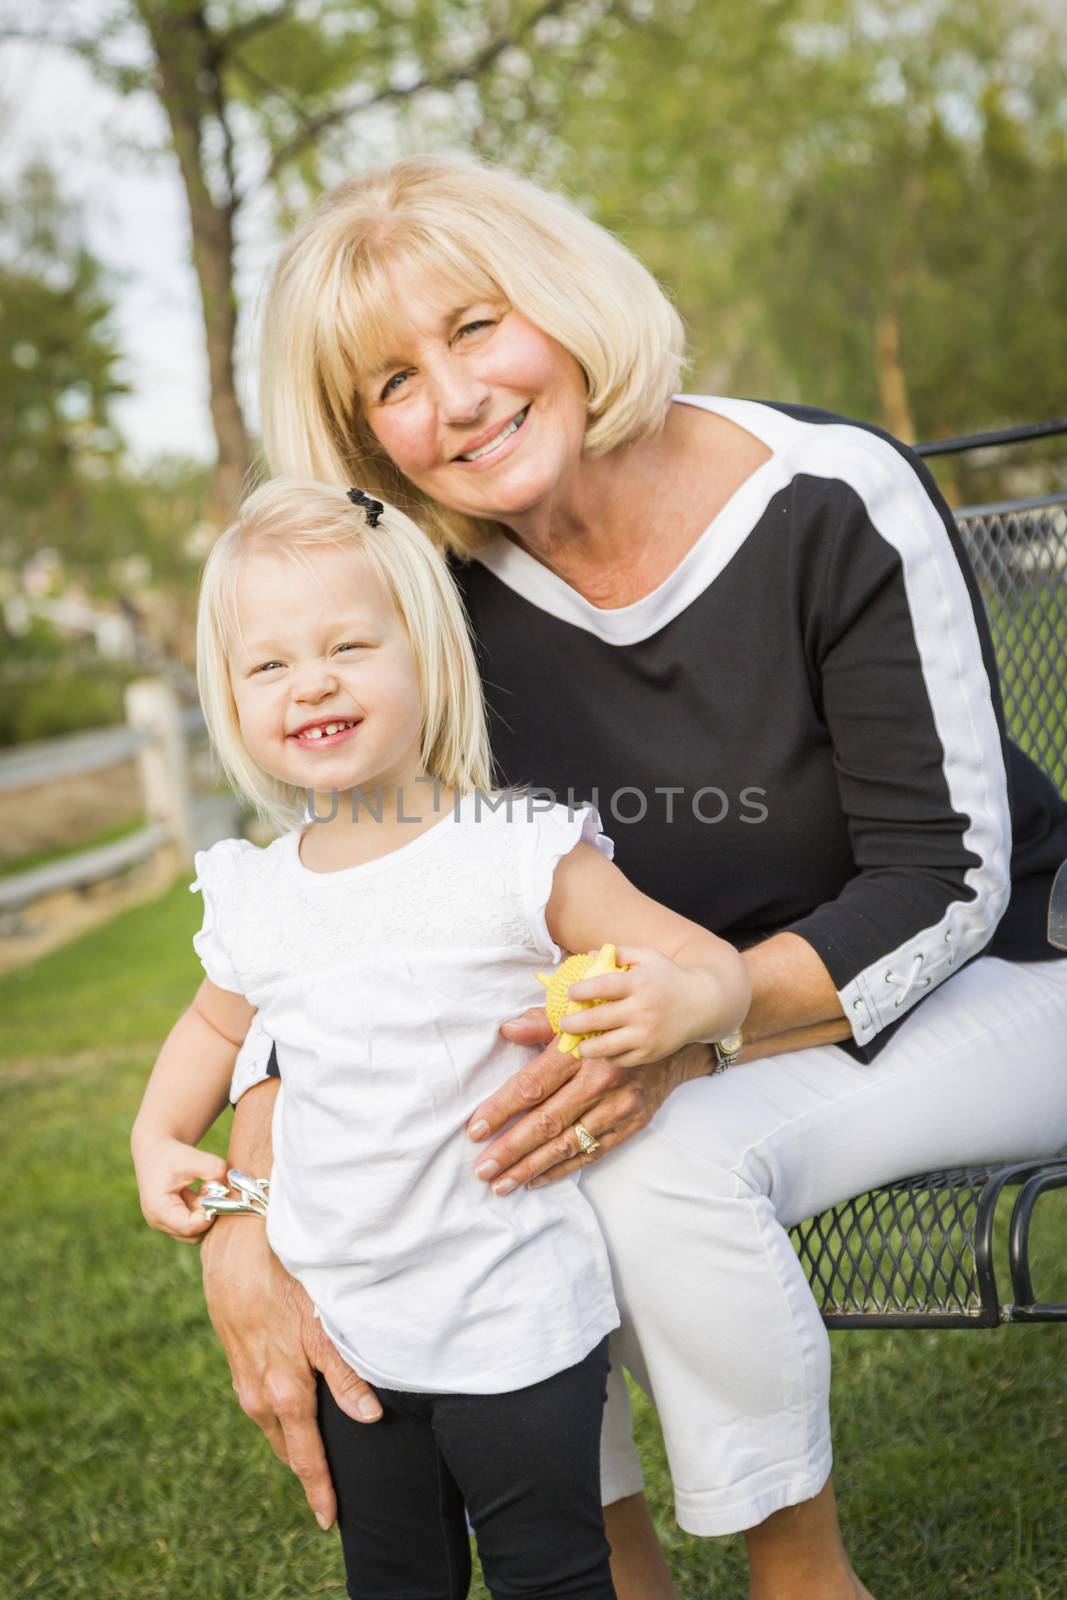 Grandmother and Granddaughter Playing At The Park by Feverpitched